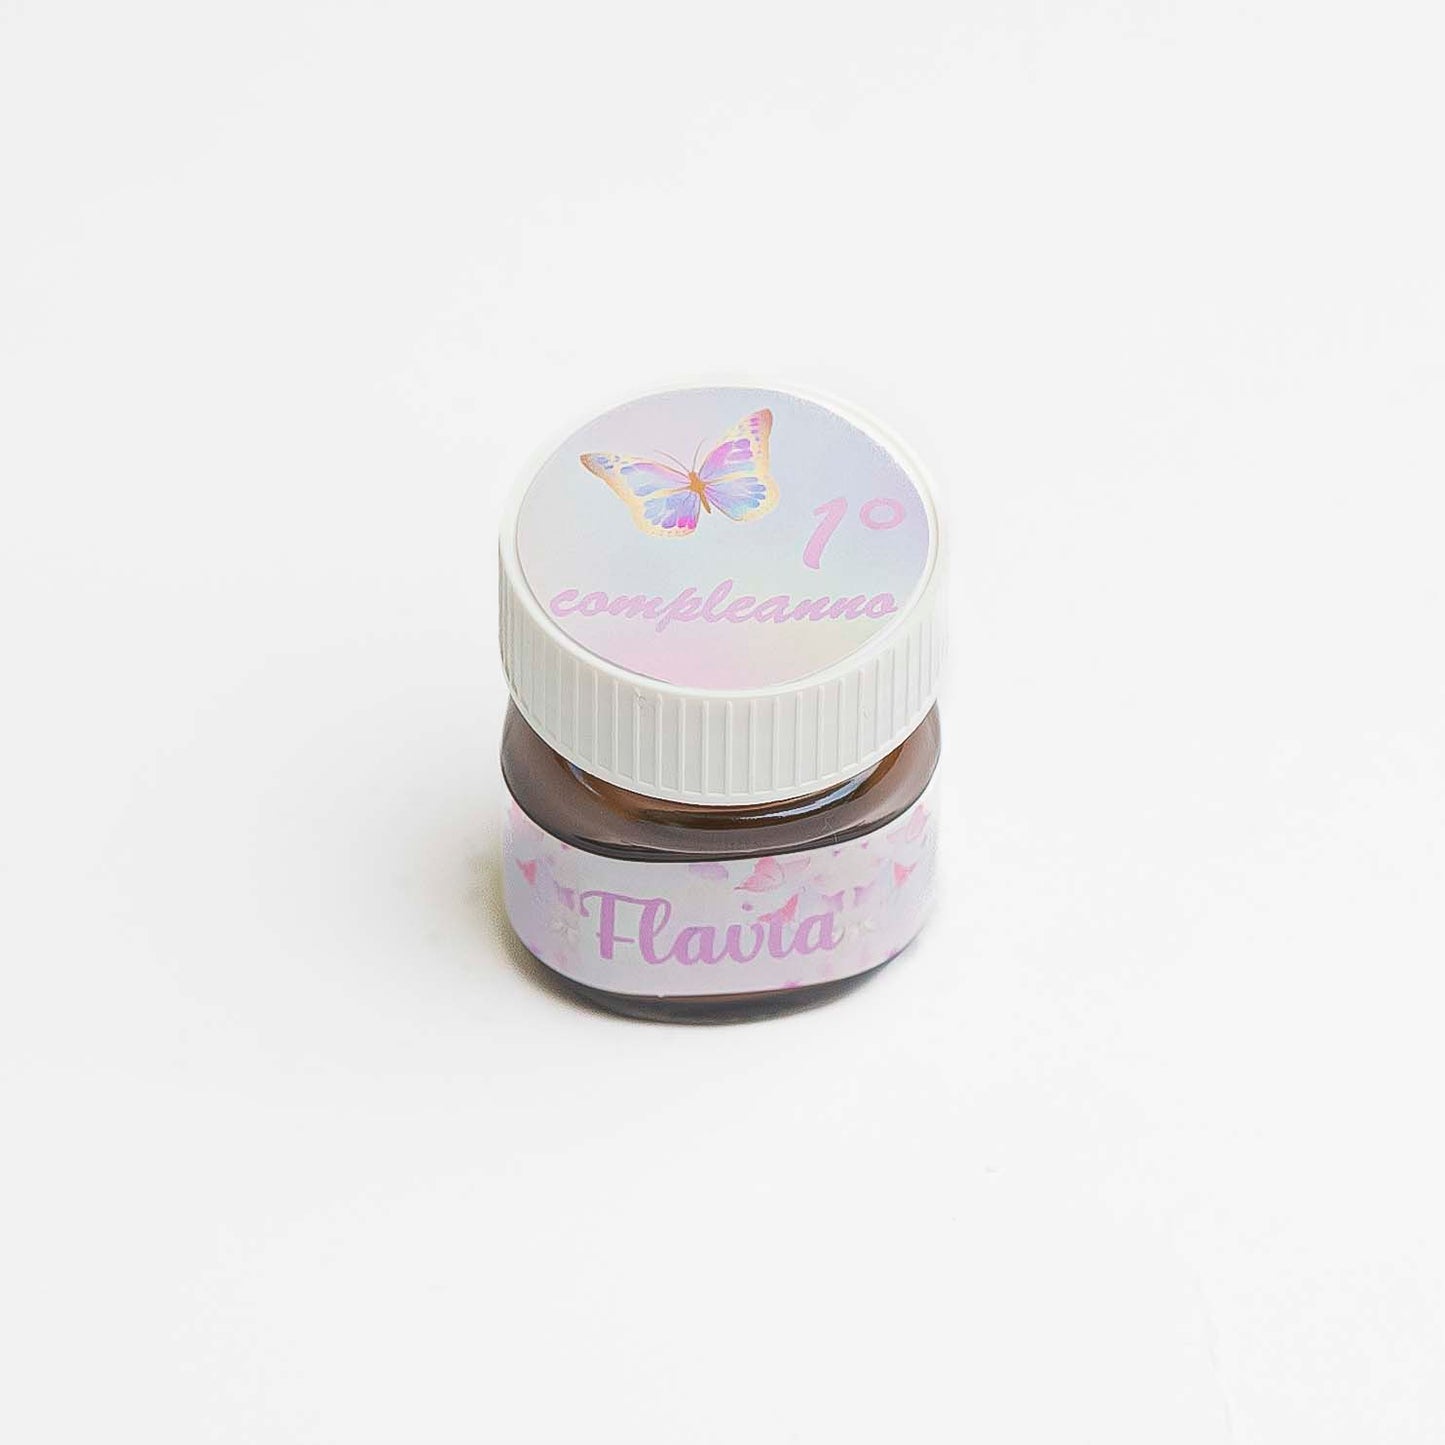 Nutelline personalizzate – Sweetie candy shop